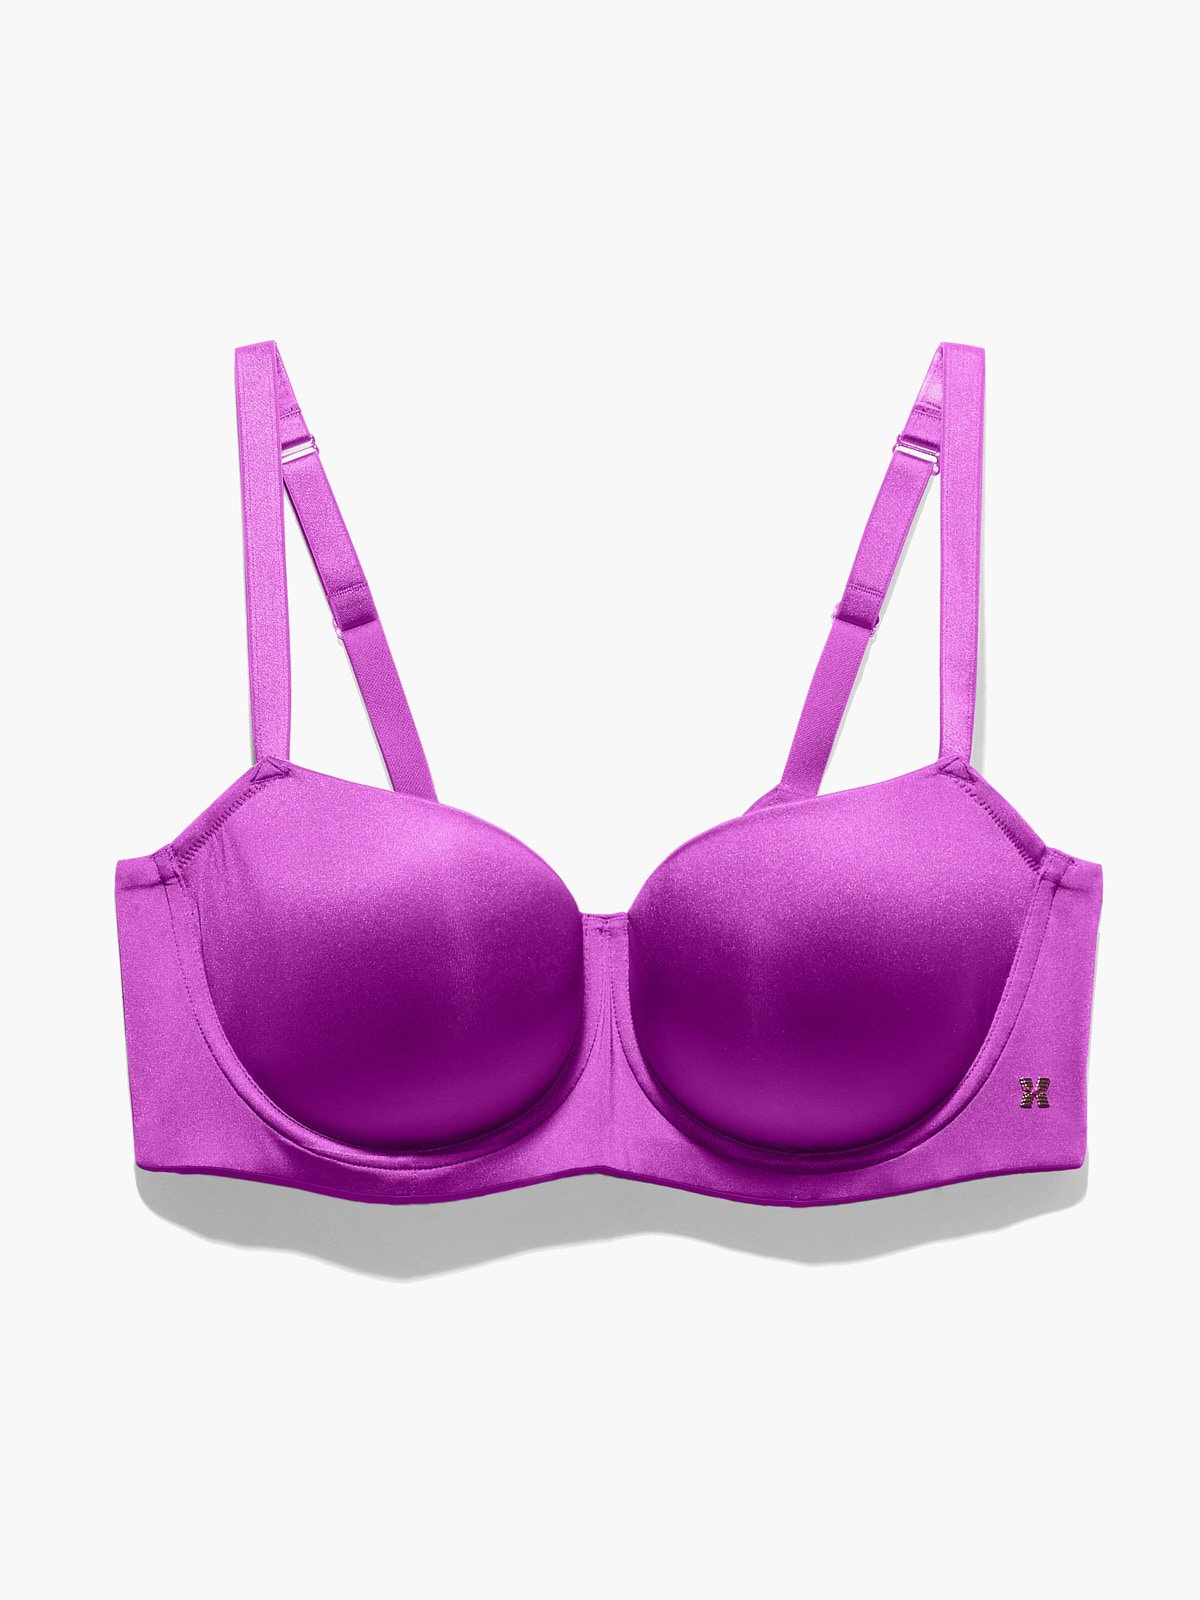 Savage X Fenty Magenta Not Sorry Balconette Bra Size undefined - $24 - From  Rebecca